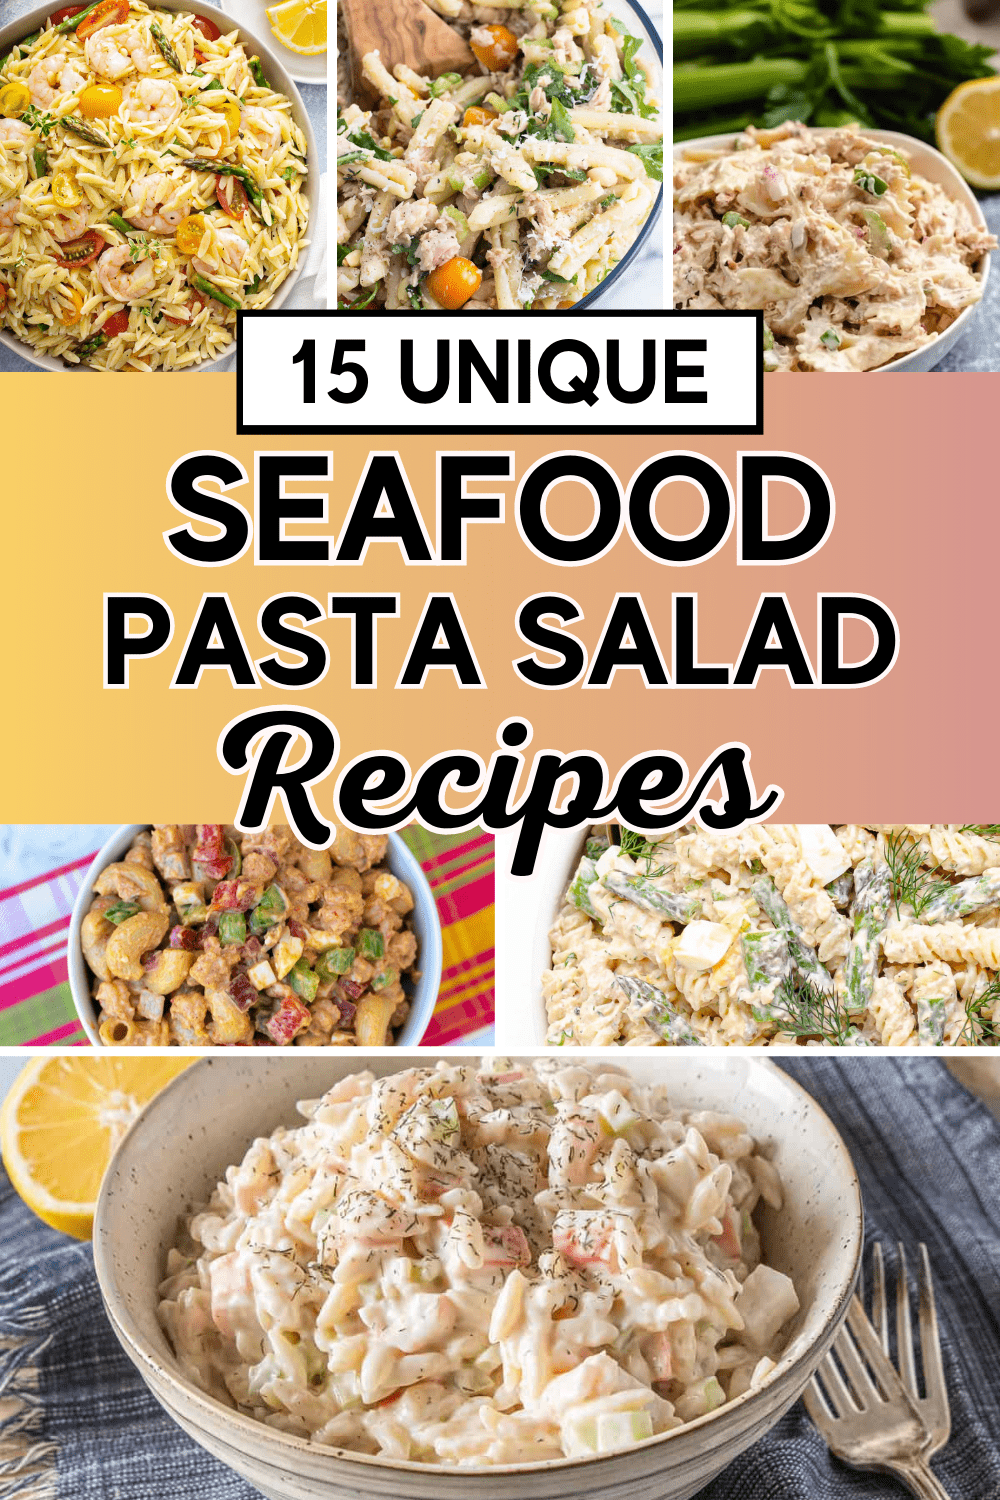 Easy seafood pasta salad recipes! These unique pasta salads have tuna, shrimp, salmon, crab, and crawfish. You may have never thought of fish in your pasta salad, but it's SO good! Shrimp pasta salad recipes, tuna pasta salad recipes, salmon pasta salad recipes, crab pasta salad recipes. Cold pasta salad recipes with seafood, shrimp pasta salad recipes with italian dressing and old bay, seafood pasta salads crab and shrimp. Best seafood pasta salad recipe, easy pasta salad recipes cold simple.